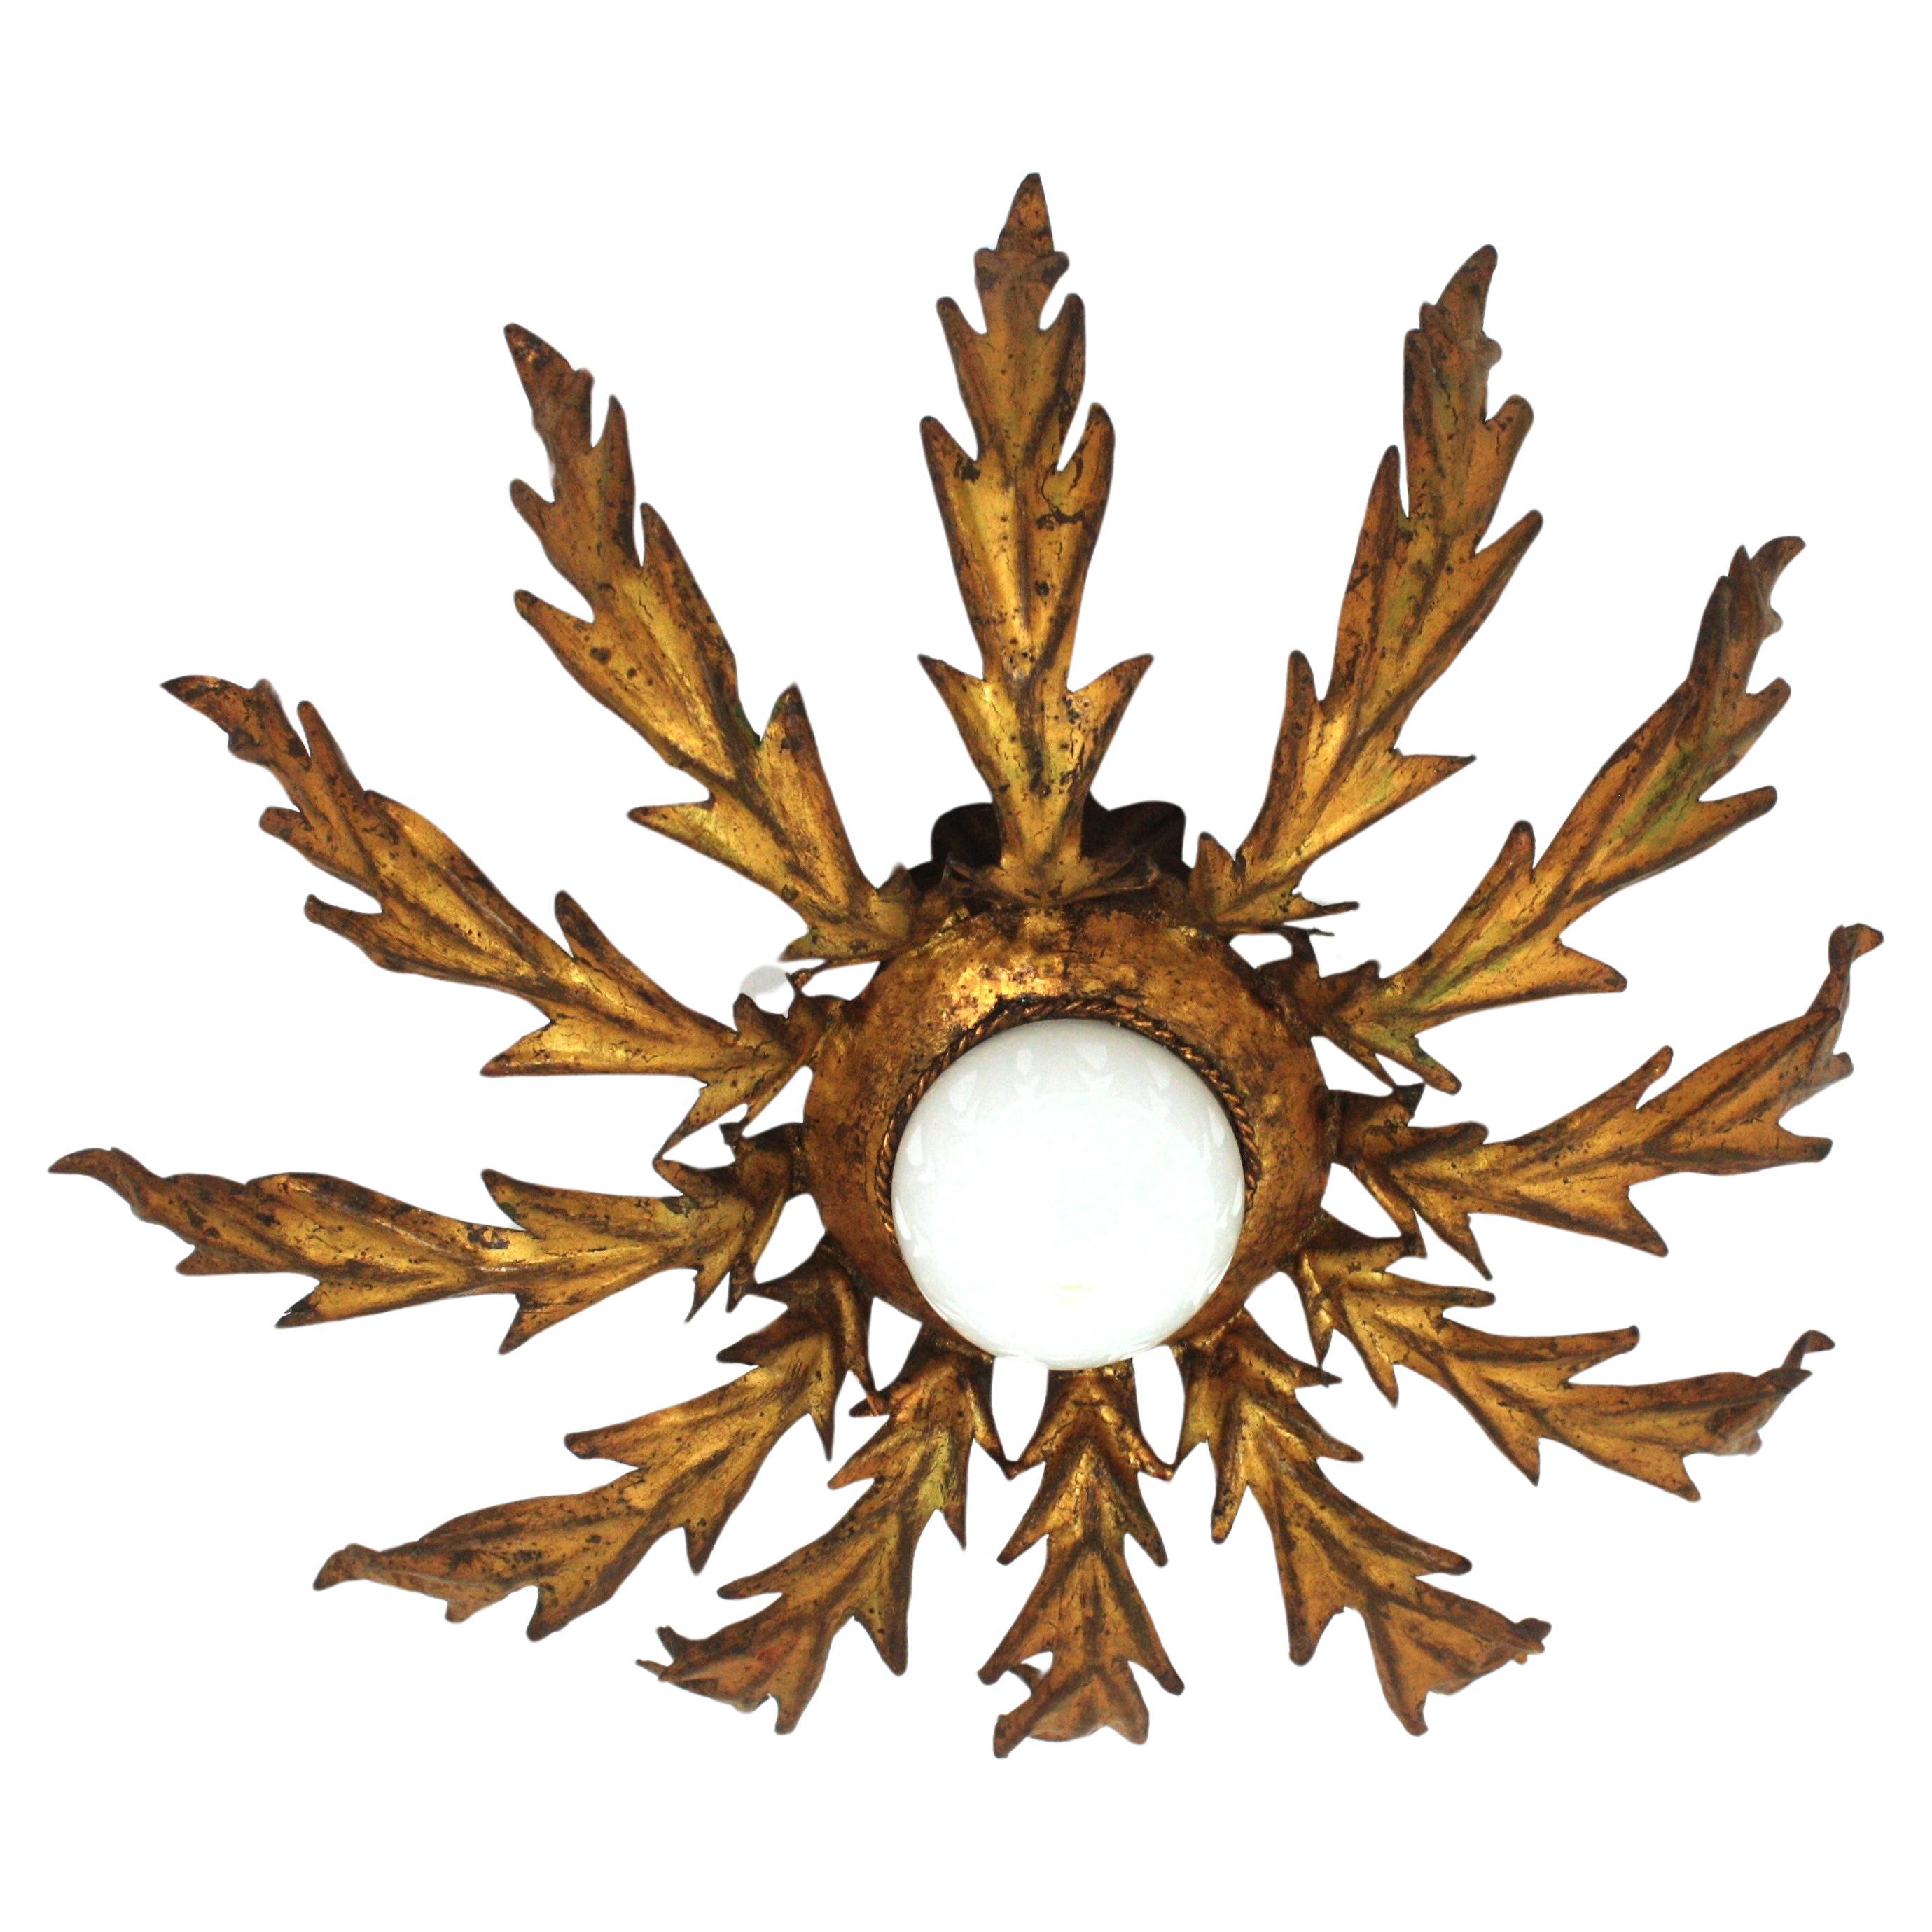 French Sunburst Leafed Ceiling Light Fixture in Gilt Iron, 1940s For Sale